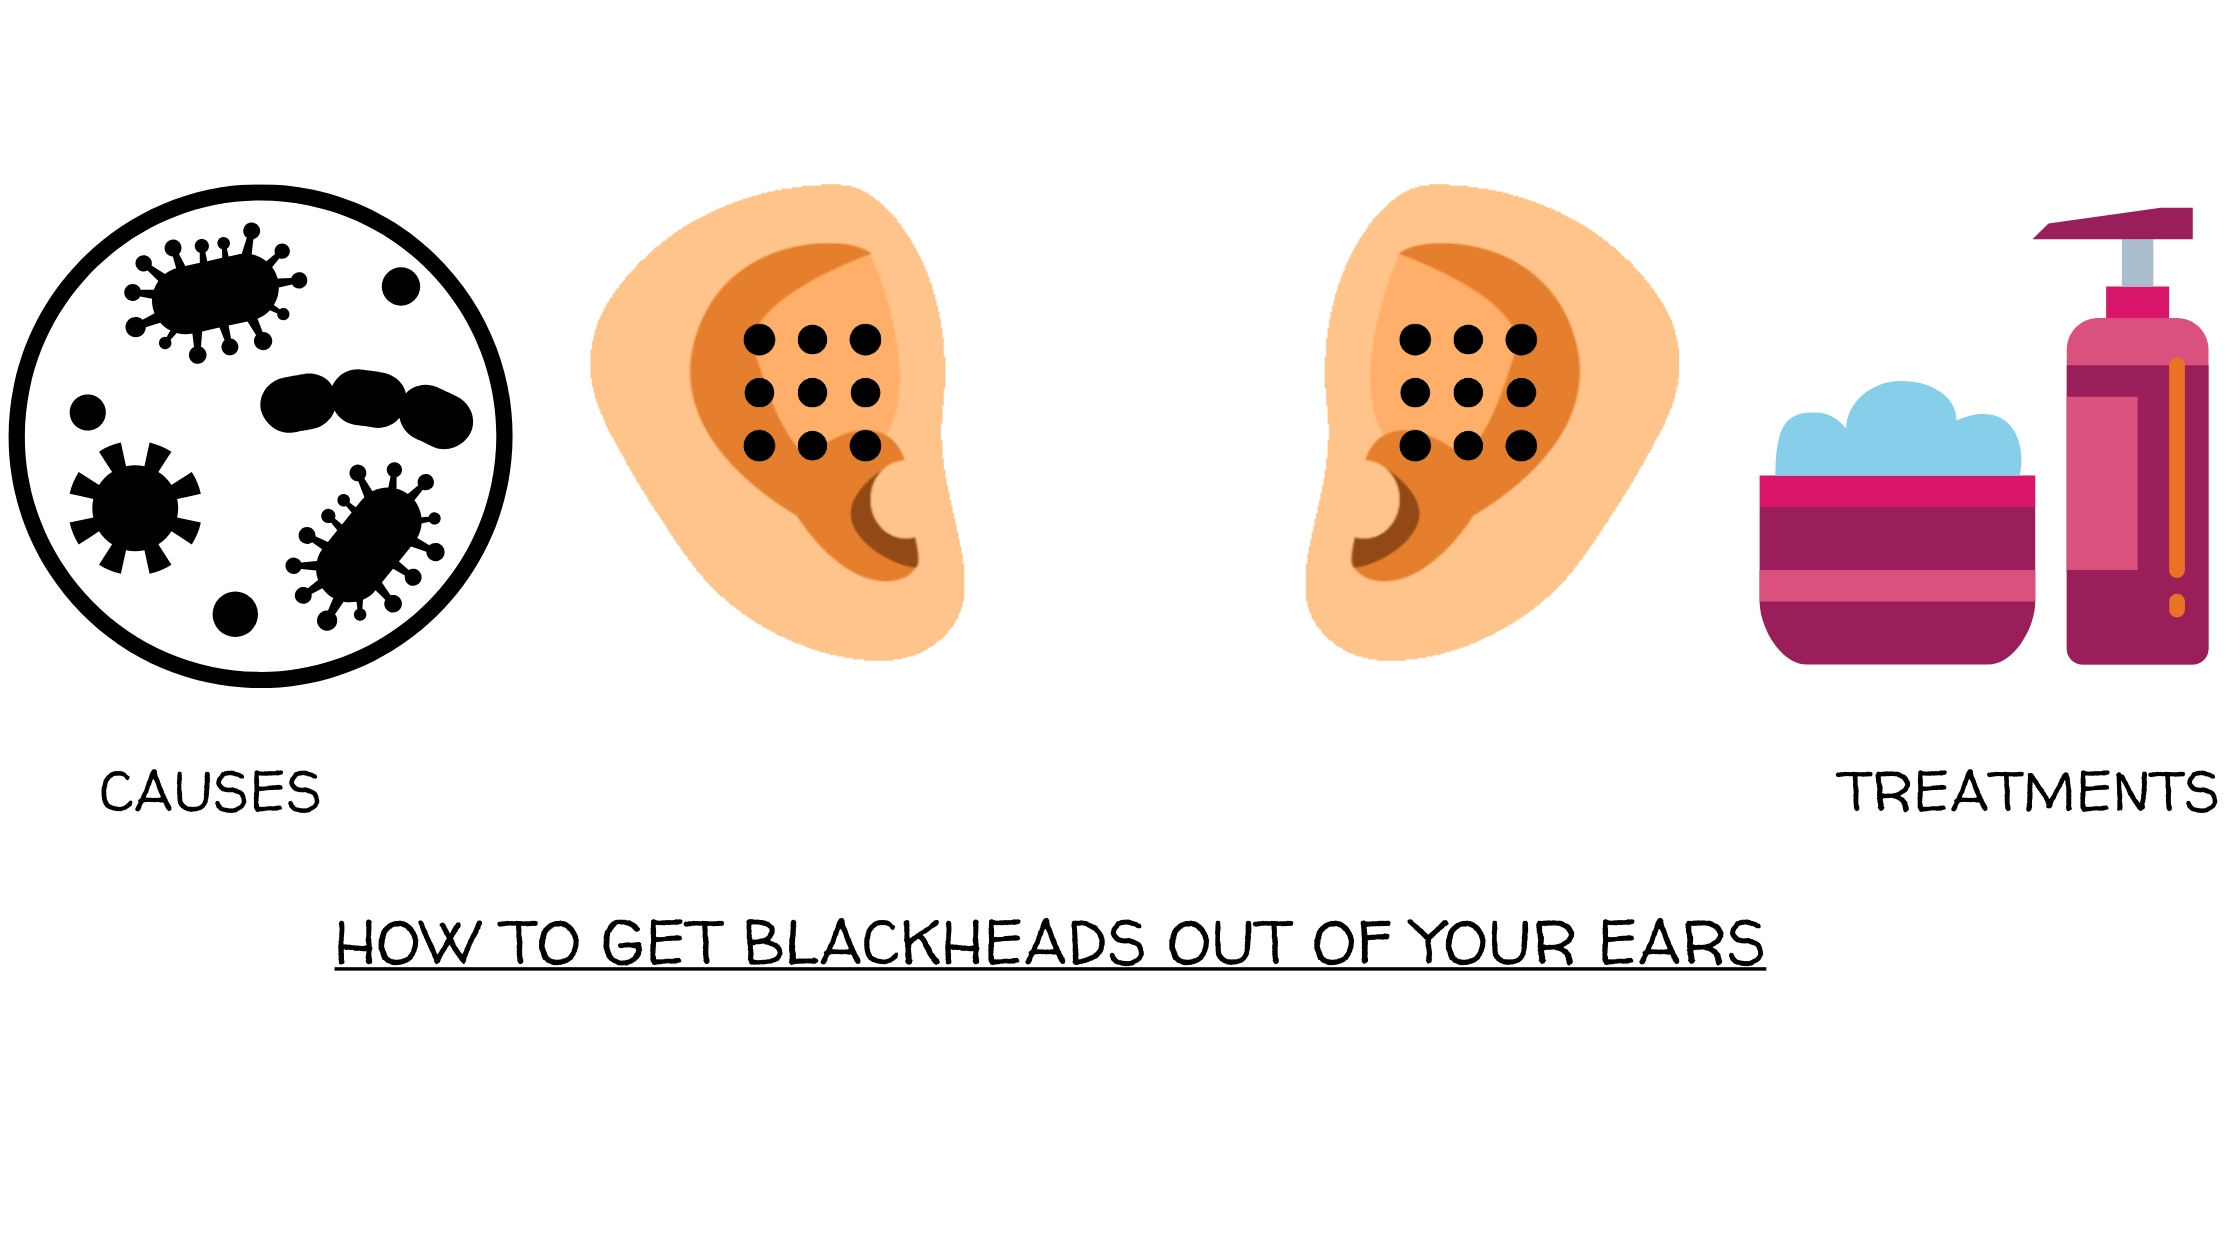 How to Get Blackheads Out of Your Ears